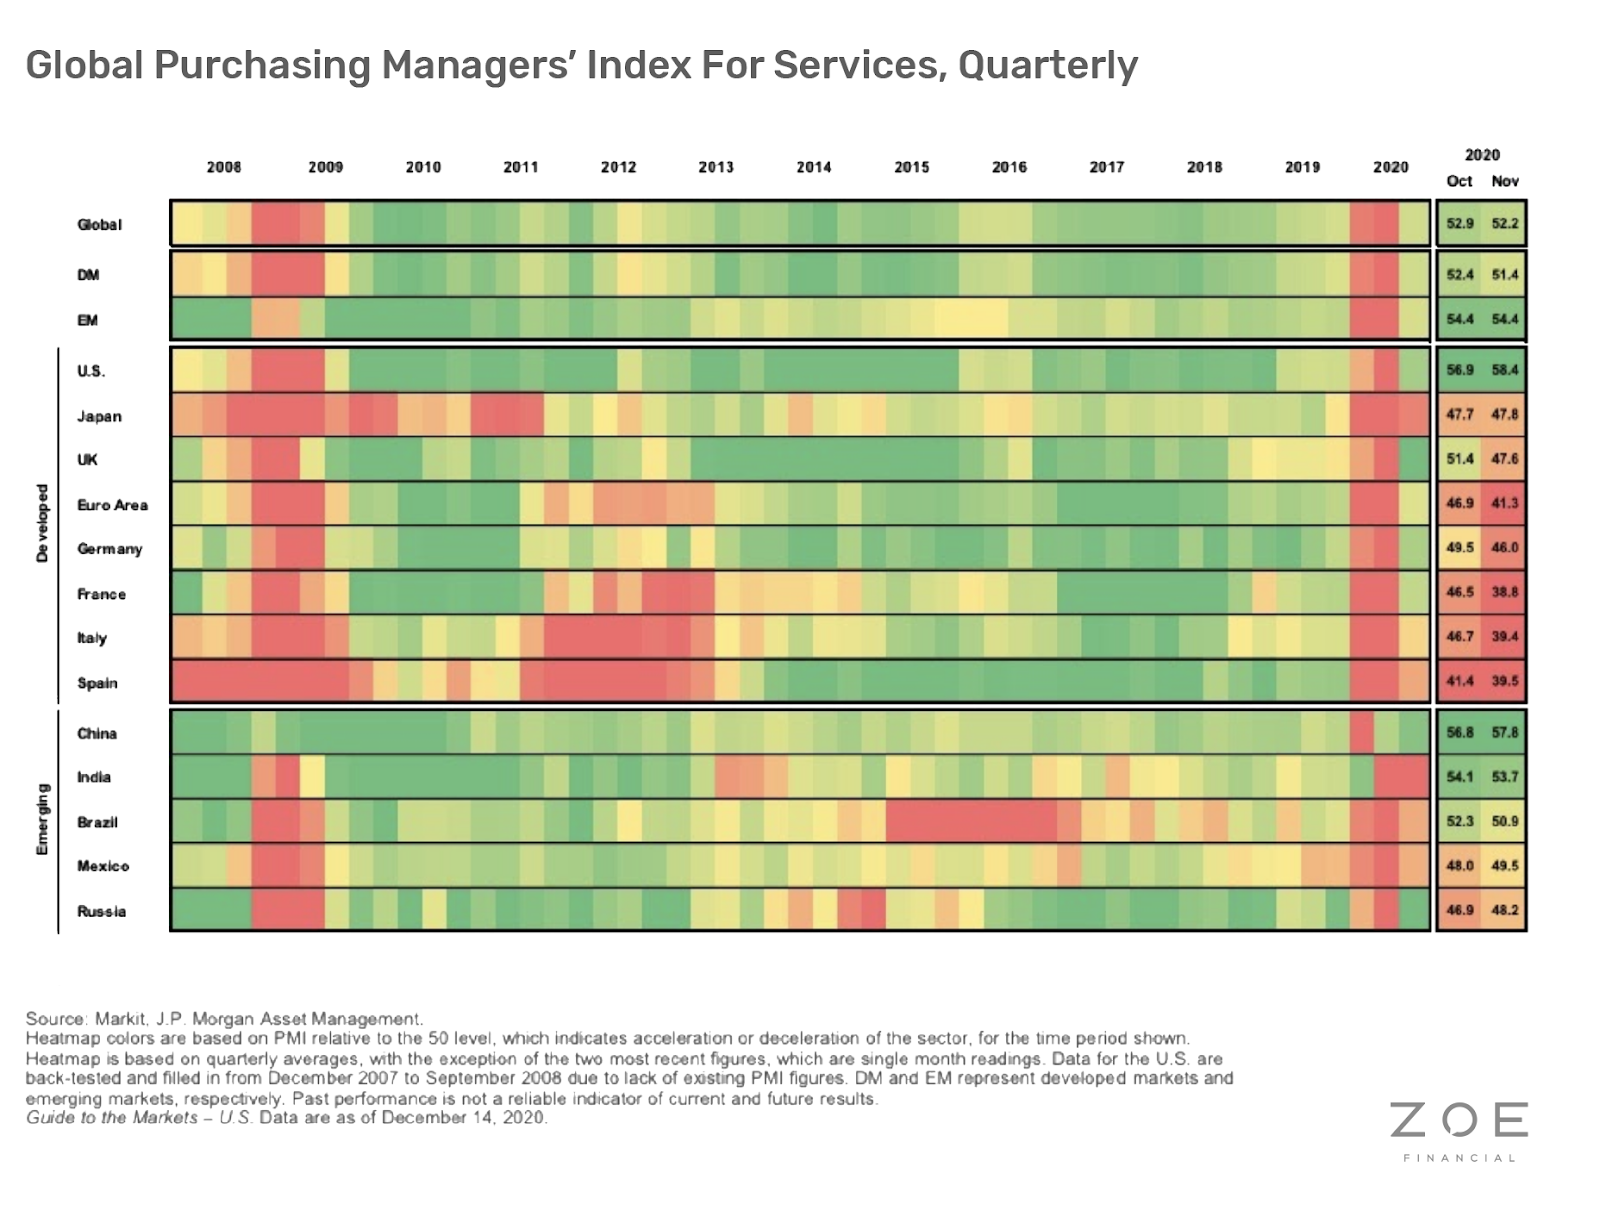 Global Purchasing managers' Index For Services, Quarterly